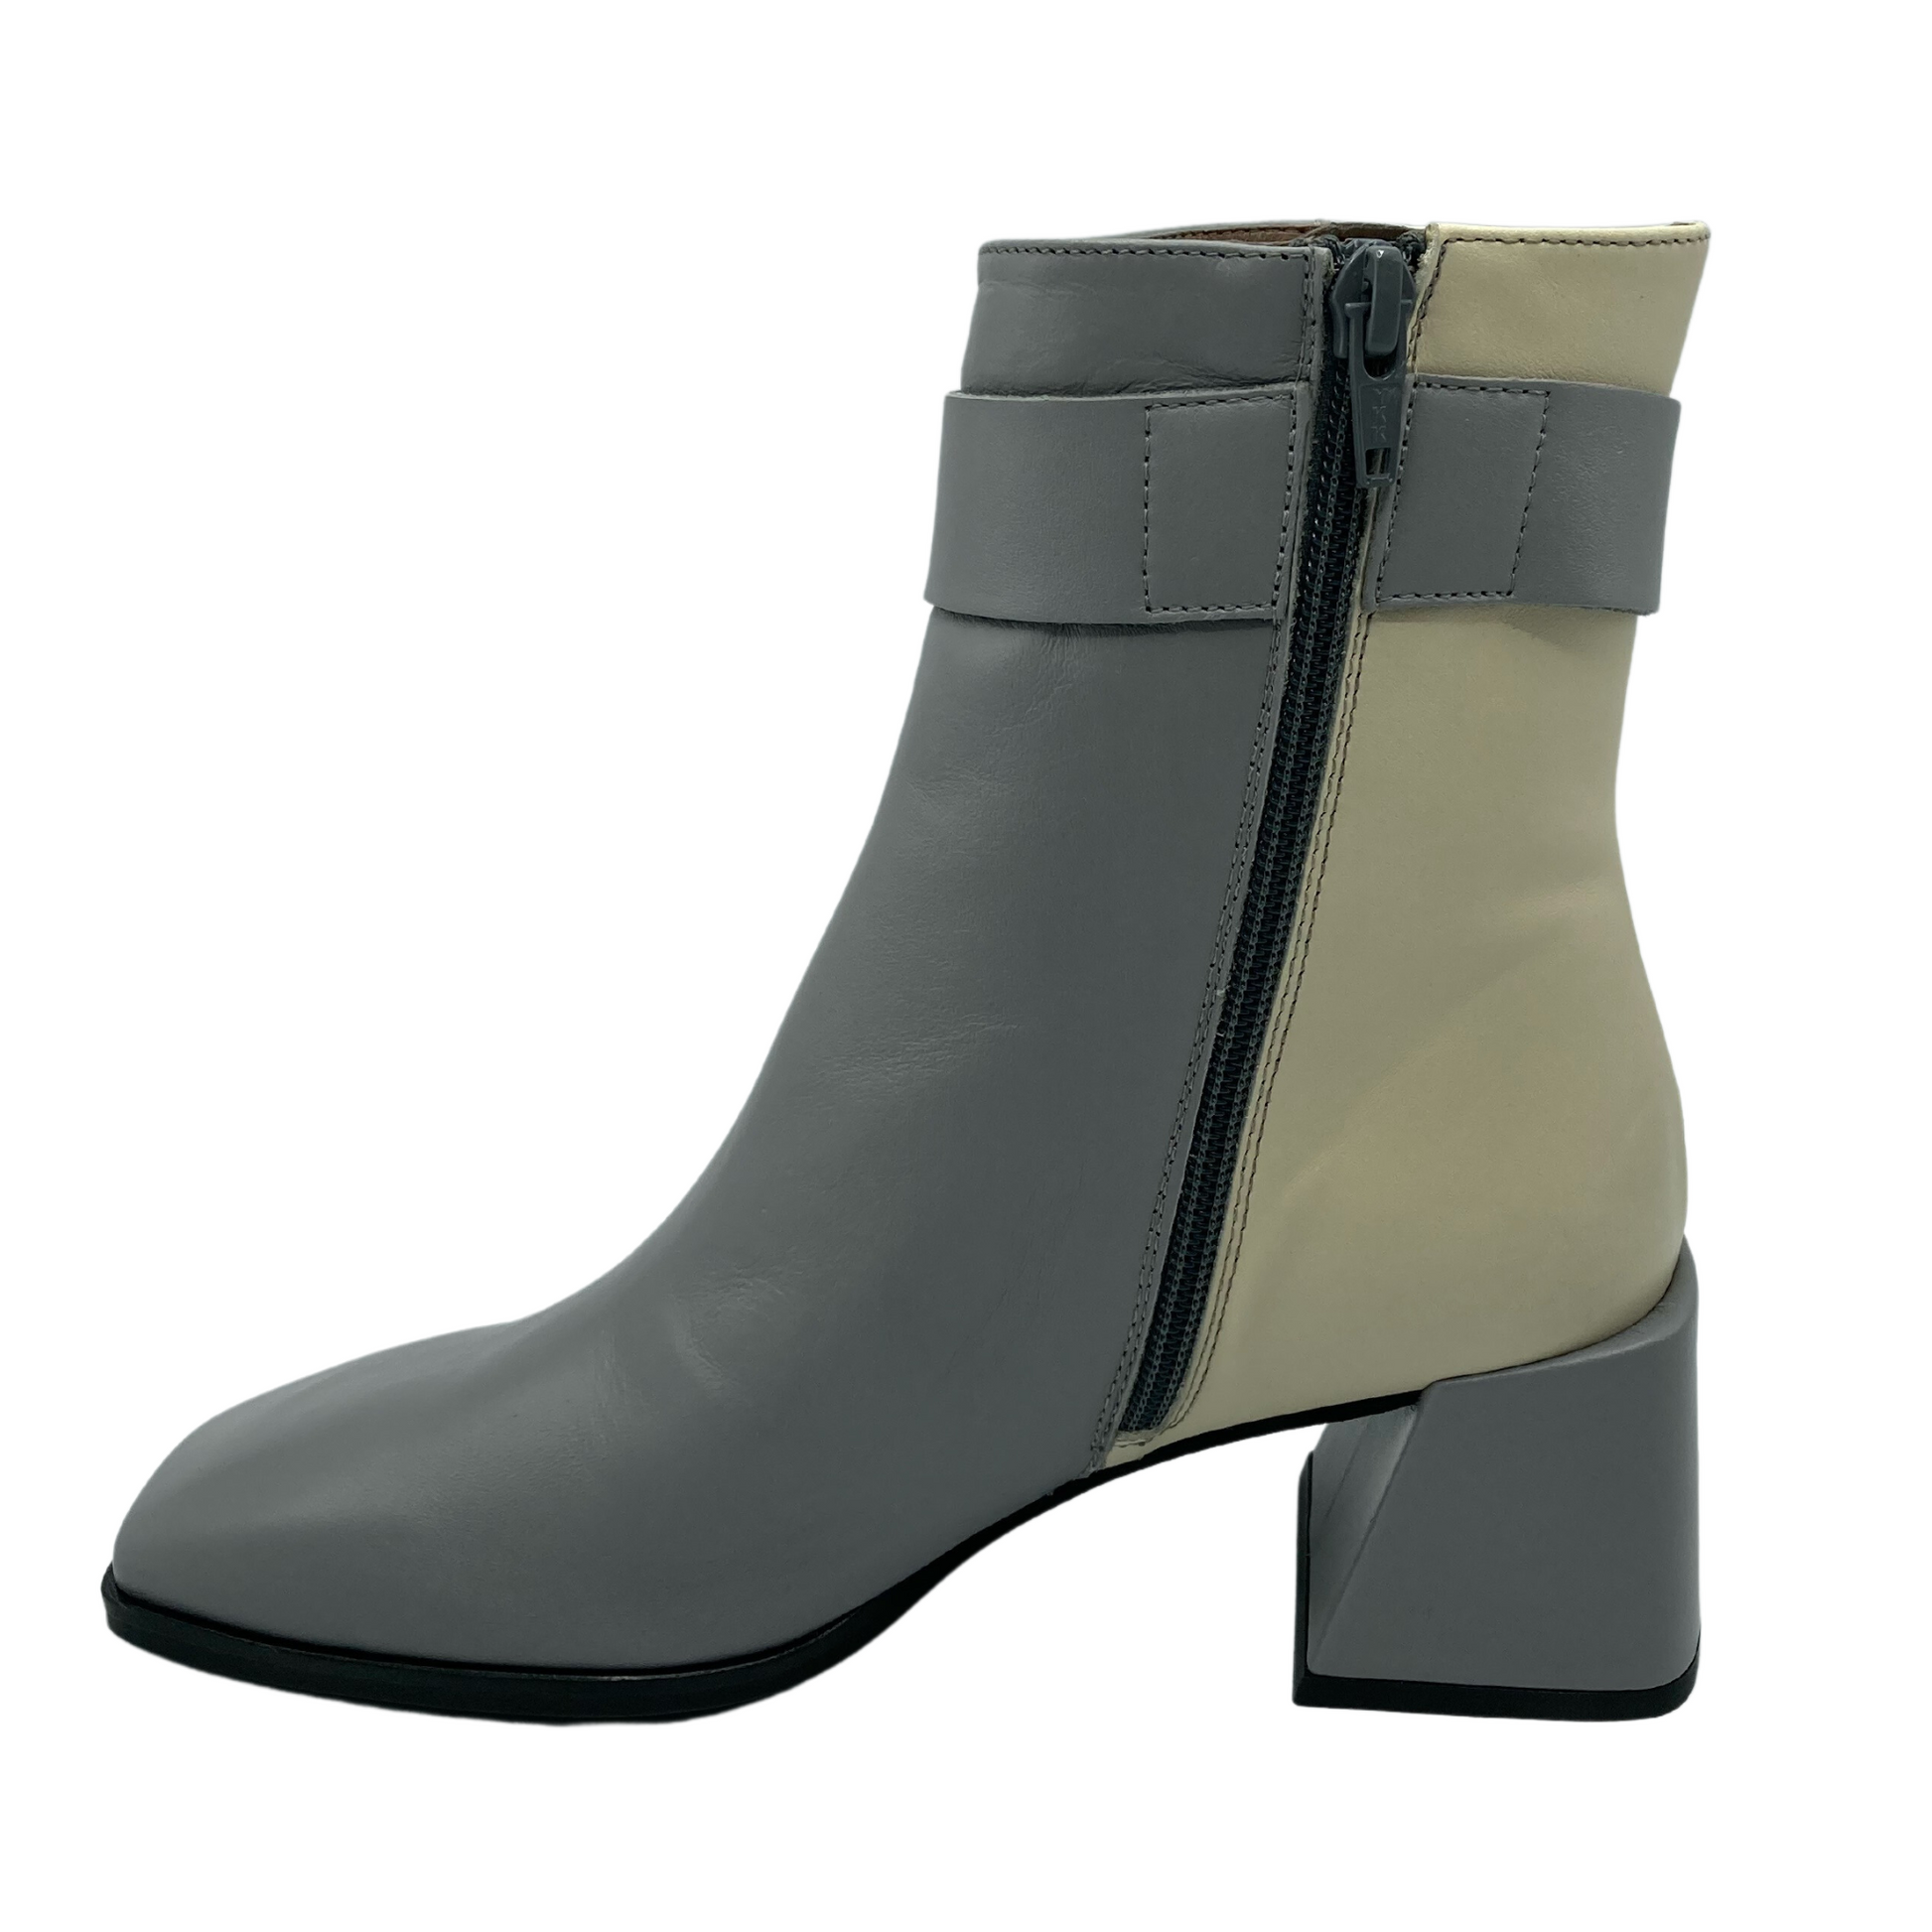 Inside profile view of grey and cream boot with dark grey zipper from bottom to top